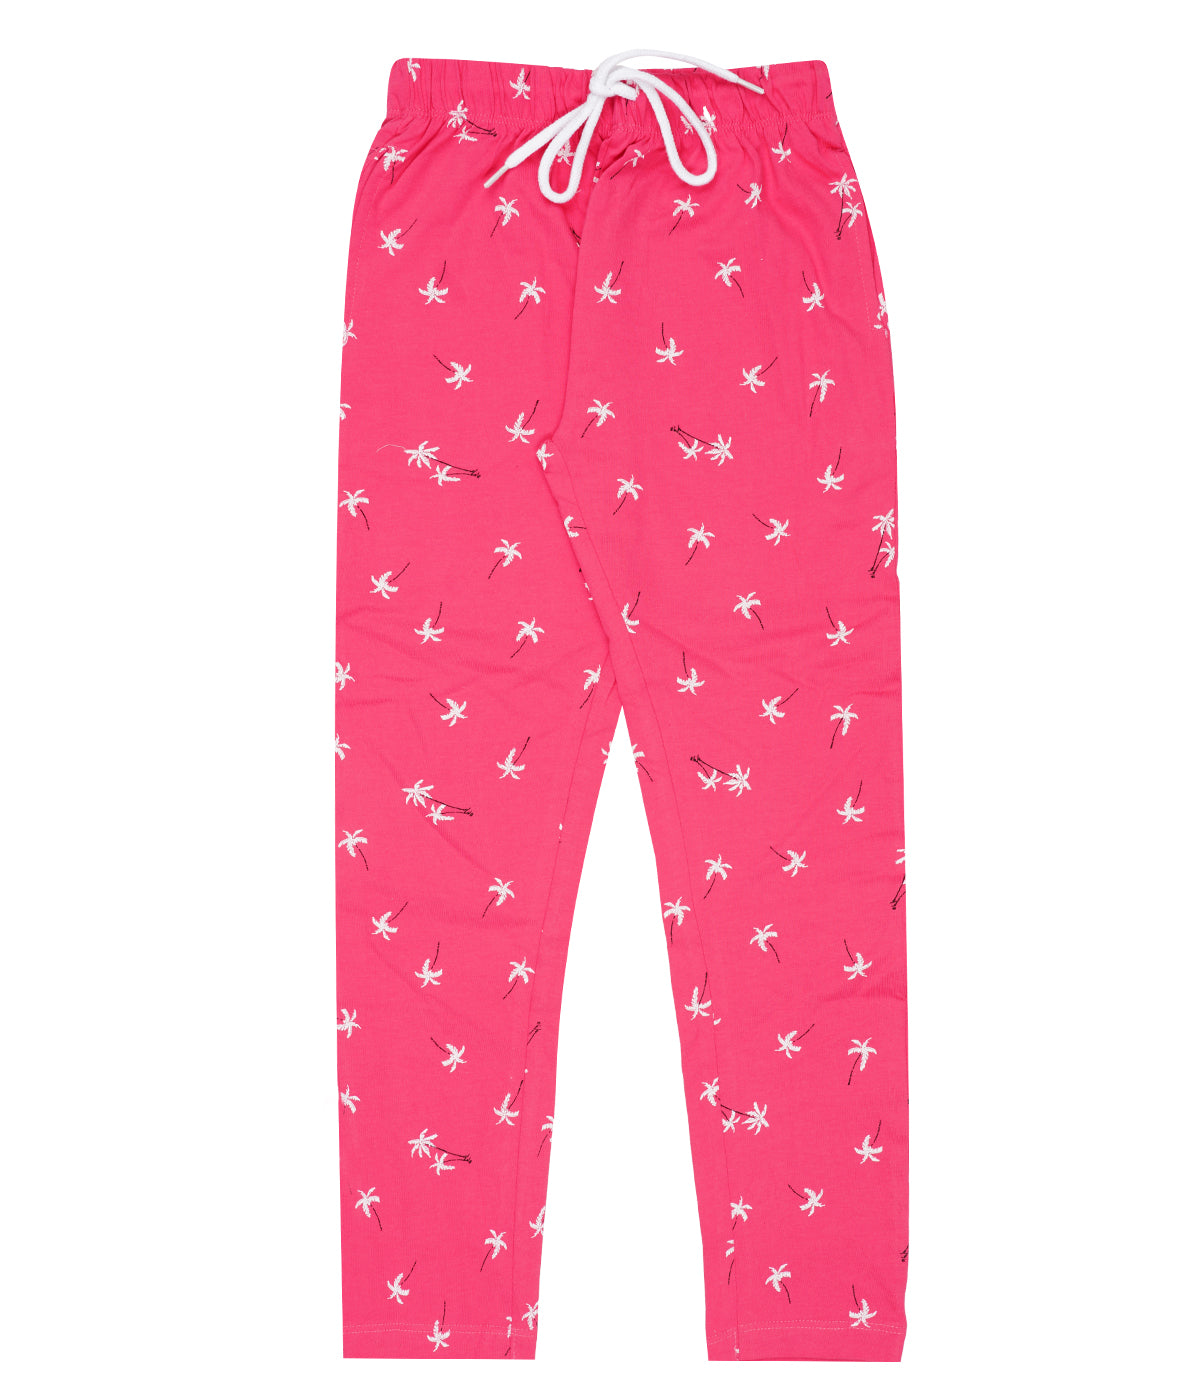 Yalzz Track Pant For Girls Pink Pack of 1